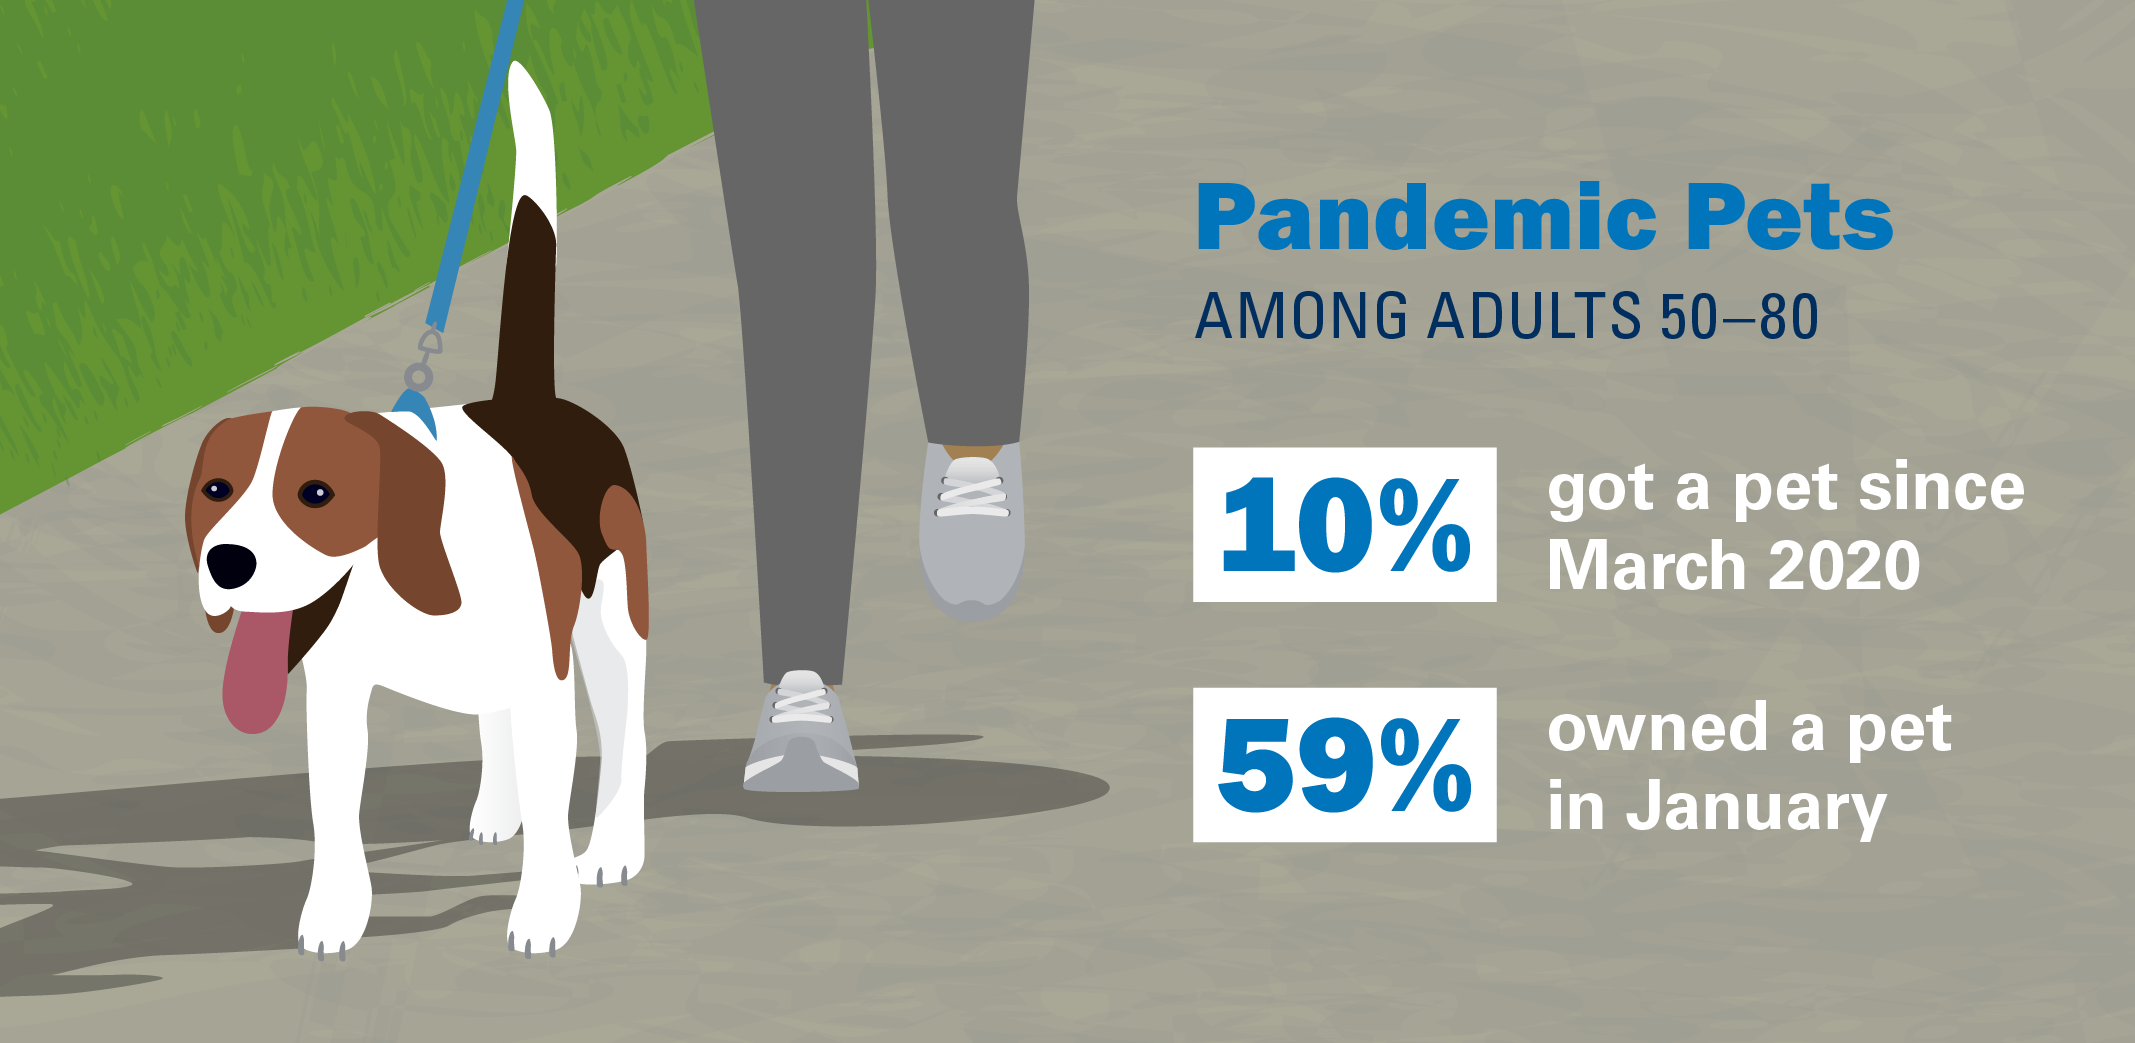 Pandemic Pets Among Adults 50–80; 10% got a pet since March 2020; 59% owned a pet in January